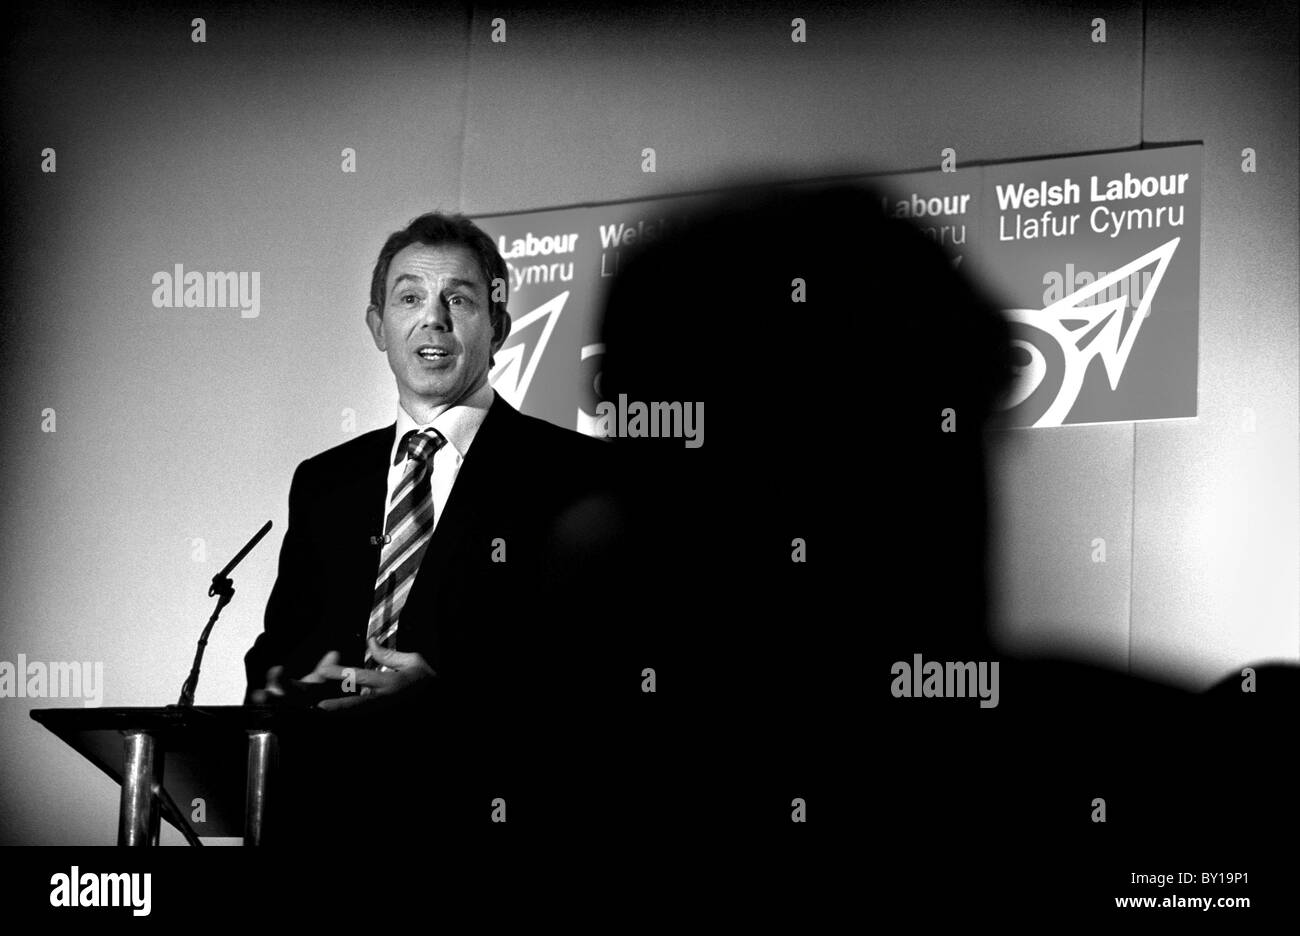 Tony Blair at Welsh Labour Conference. Stock Photo